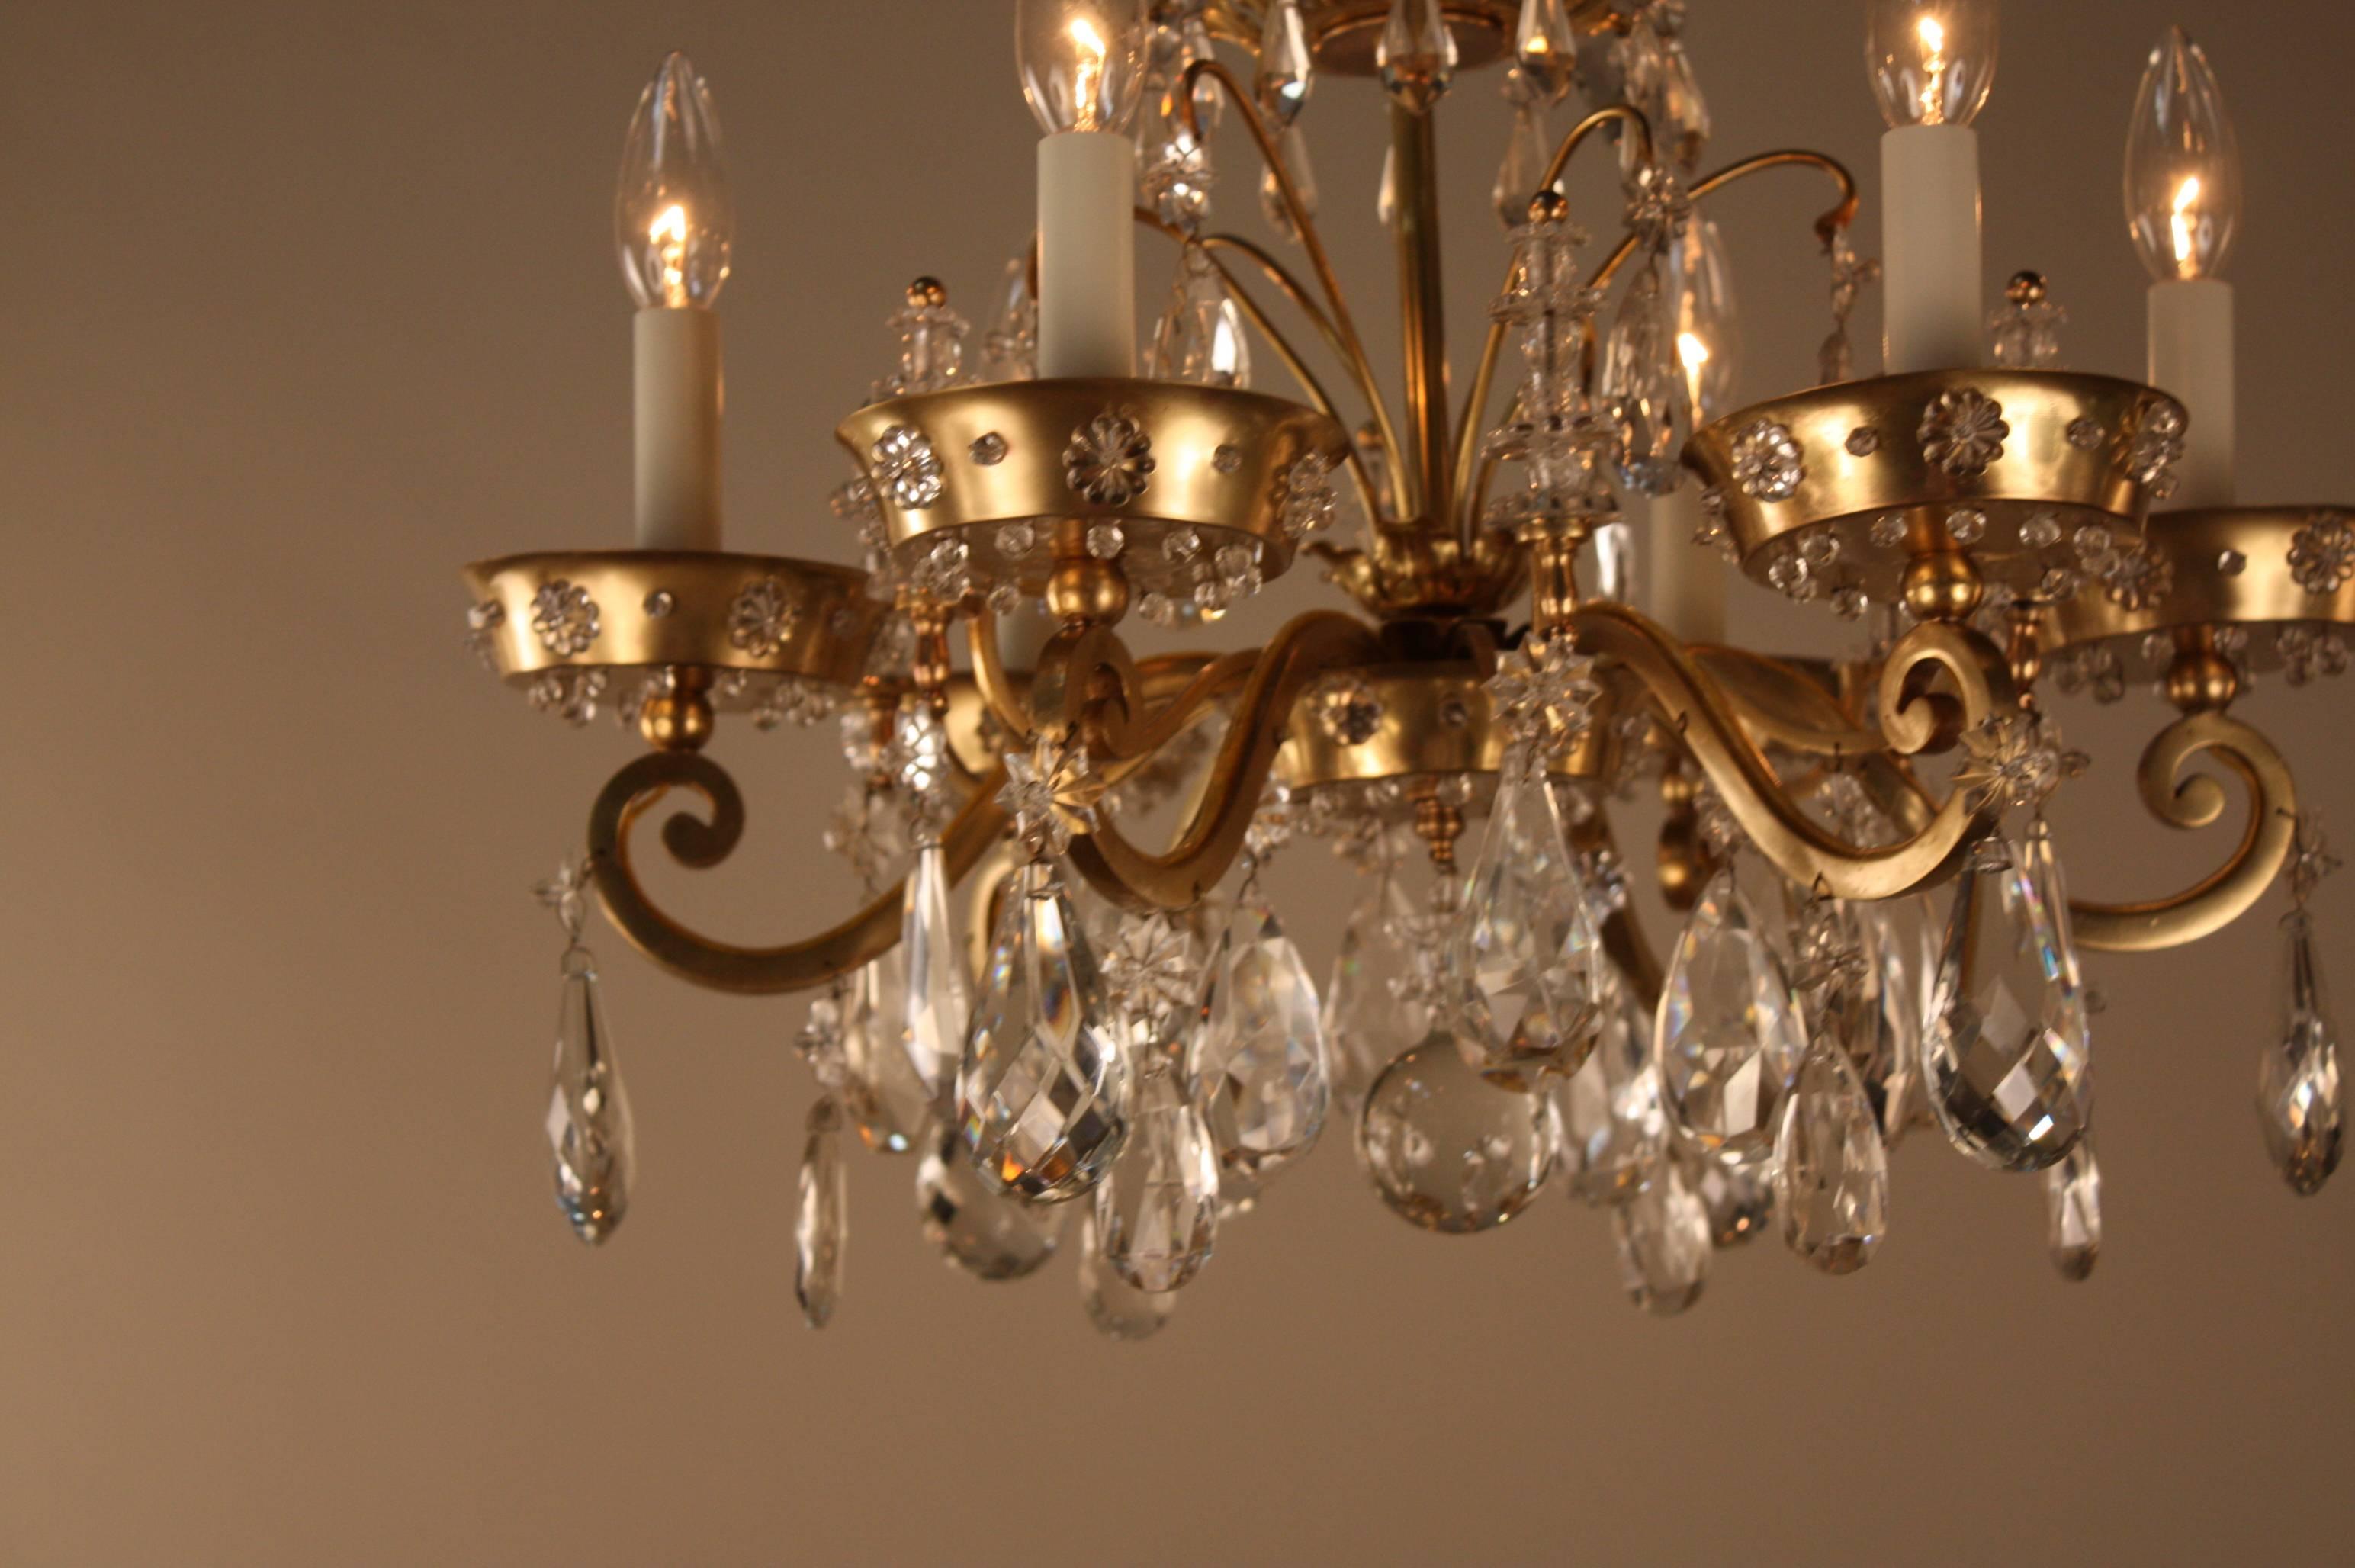 An impressive six lights with beautiful bronze design and high quality cut crystal chandelier by Maison Baguès.